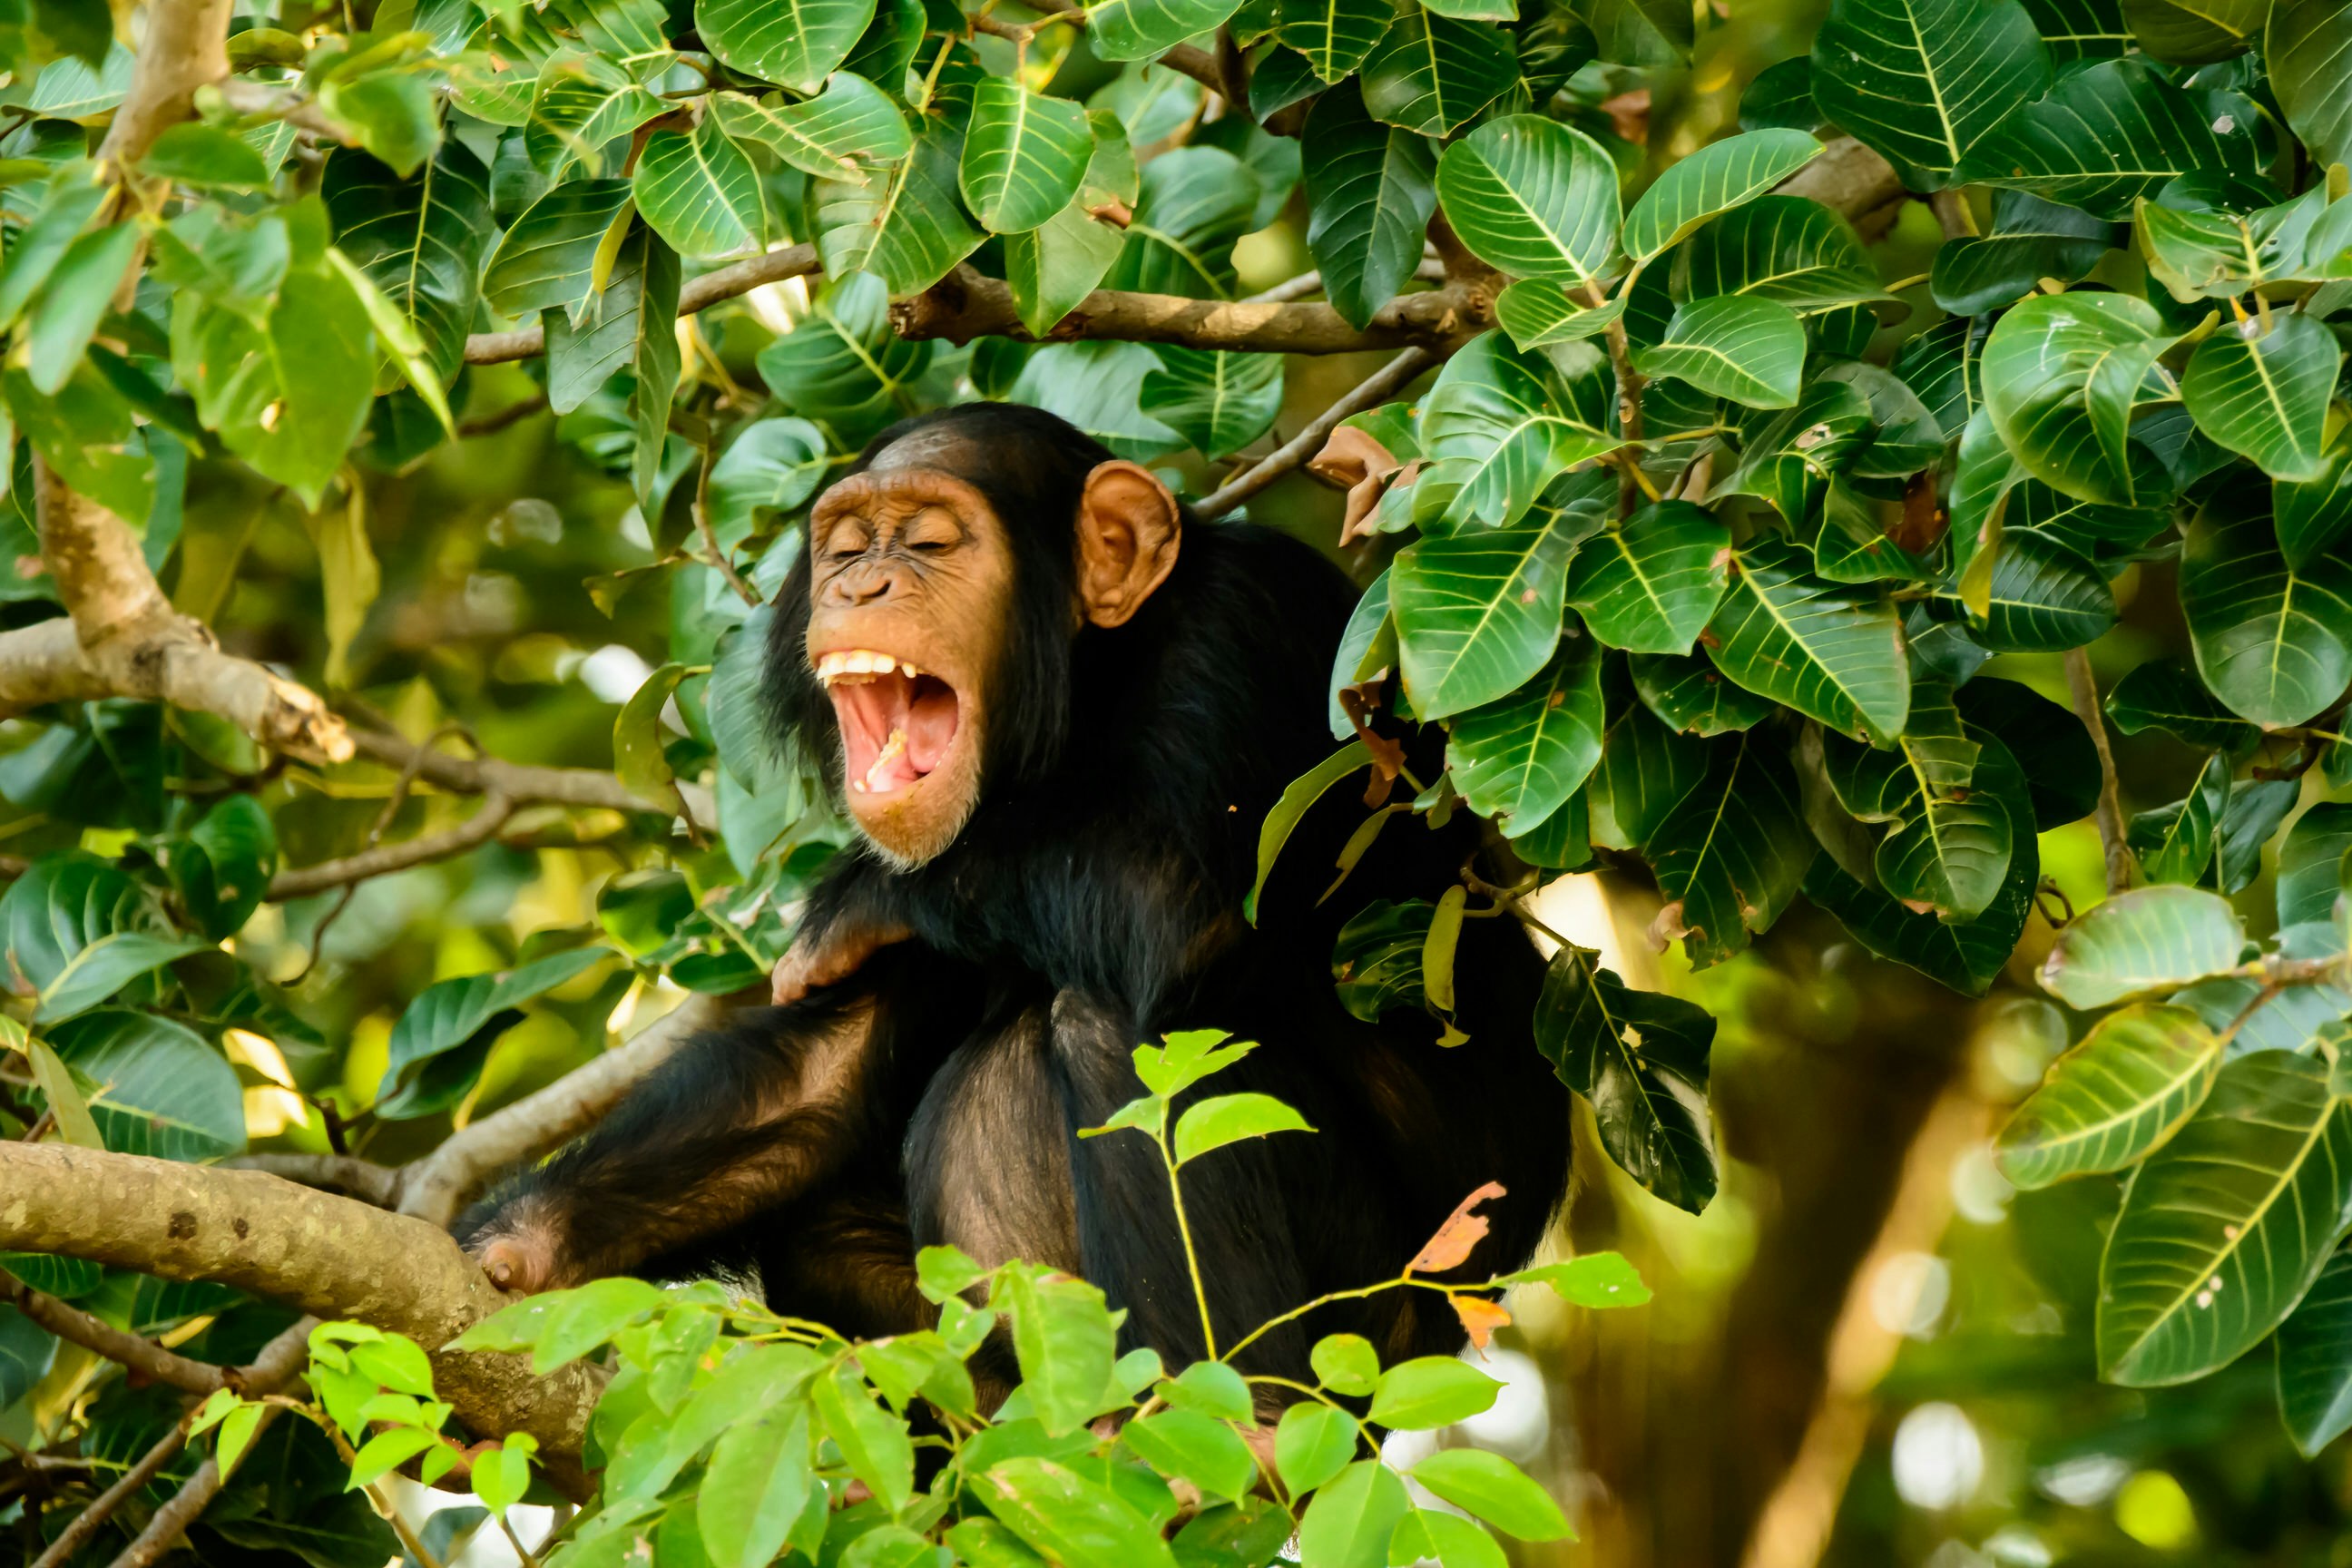 A young chimpanzee with a pink face (eyes closed, mouth agape) calls out; it sits on a small branch and is surrounded by foliage.